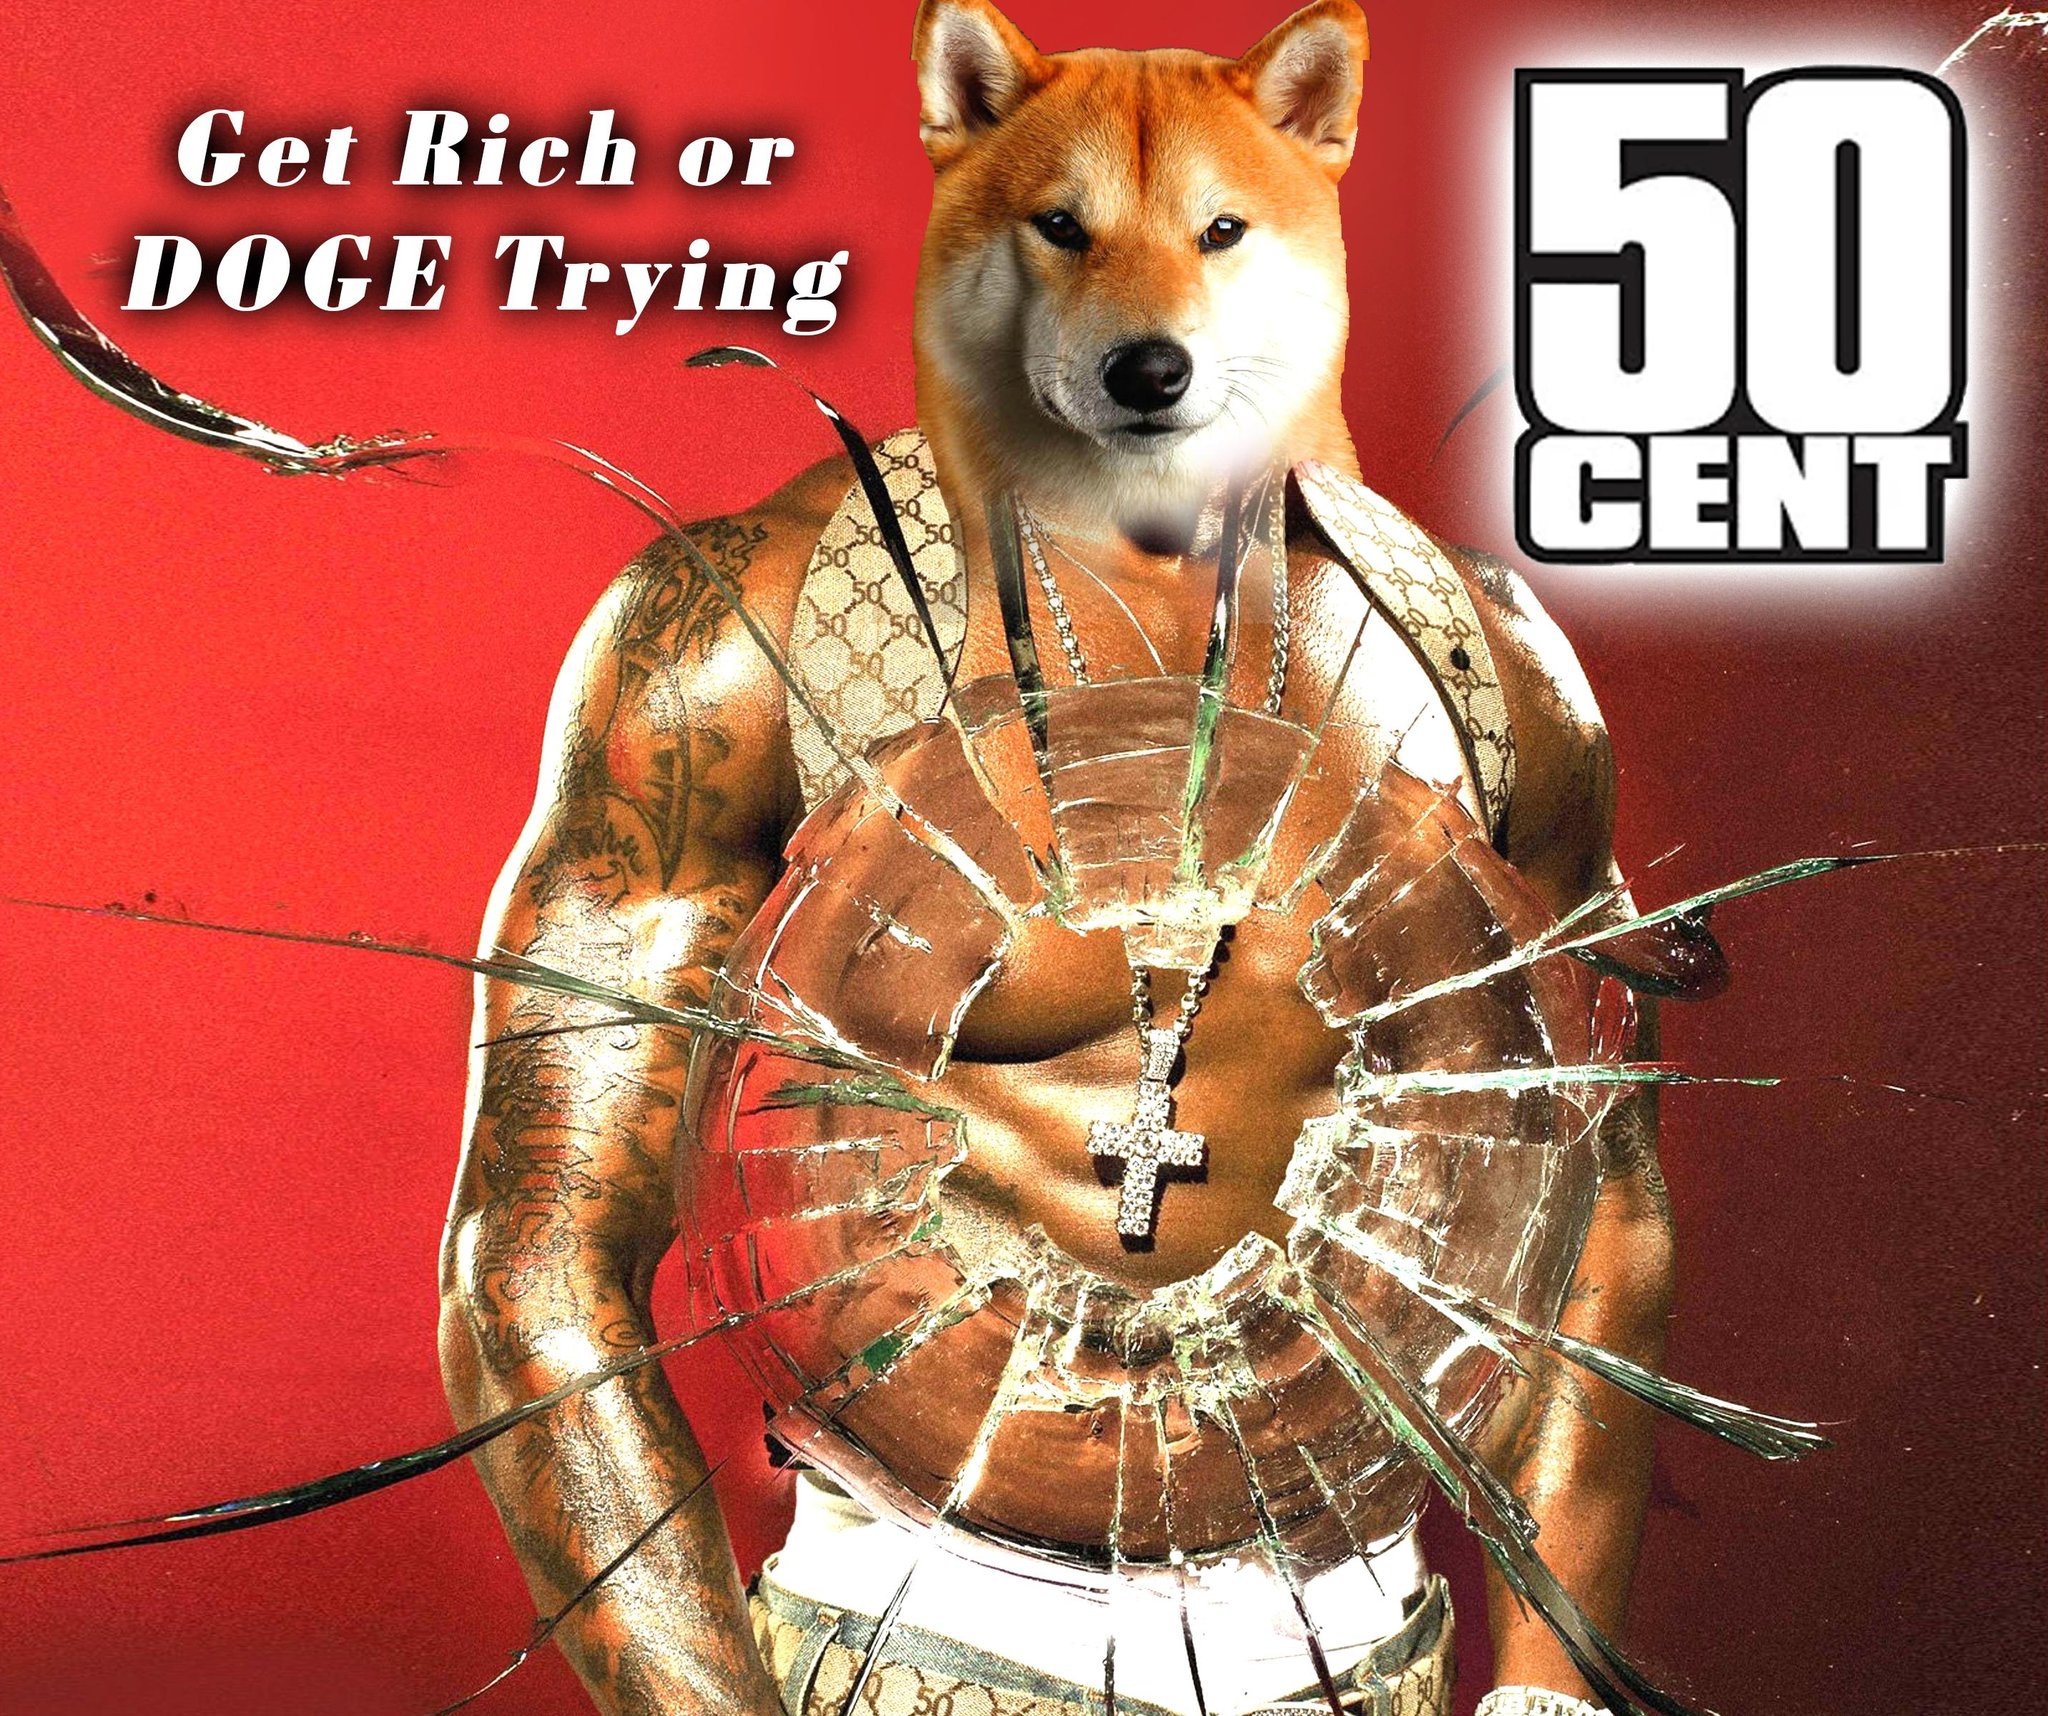 Get rich or doge trying dogecoin meme